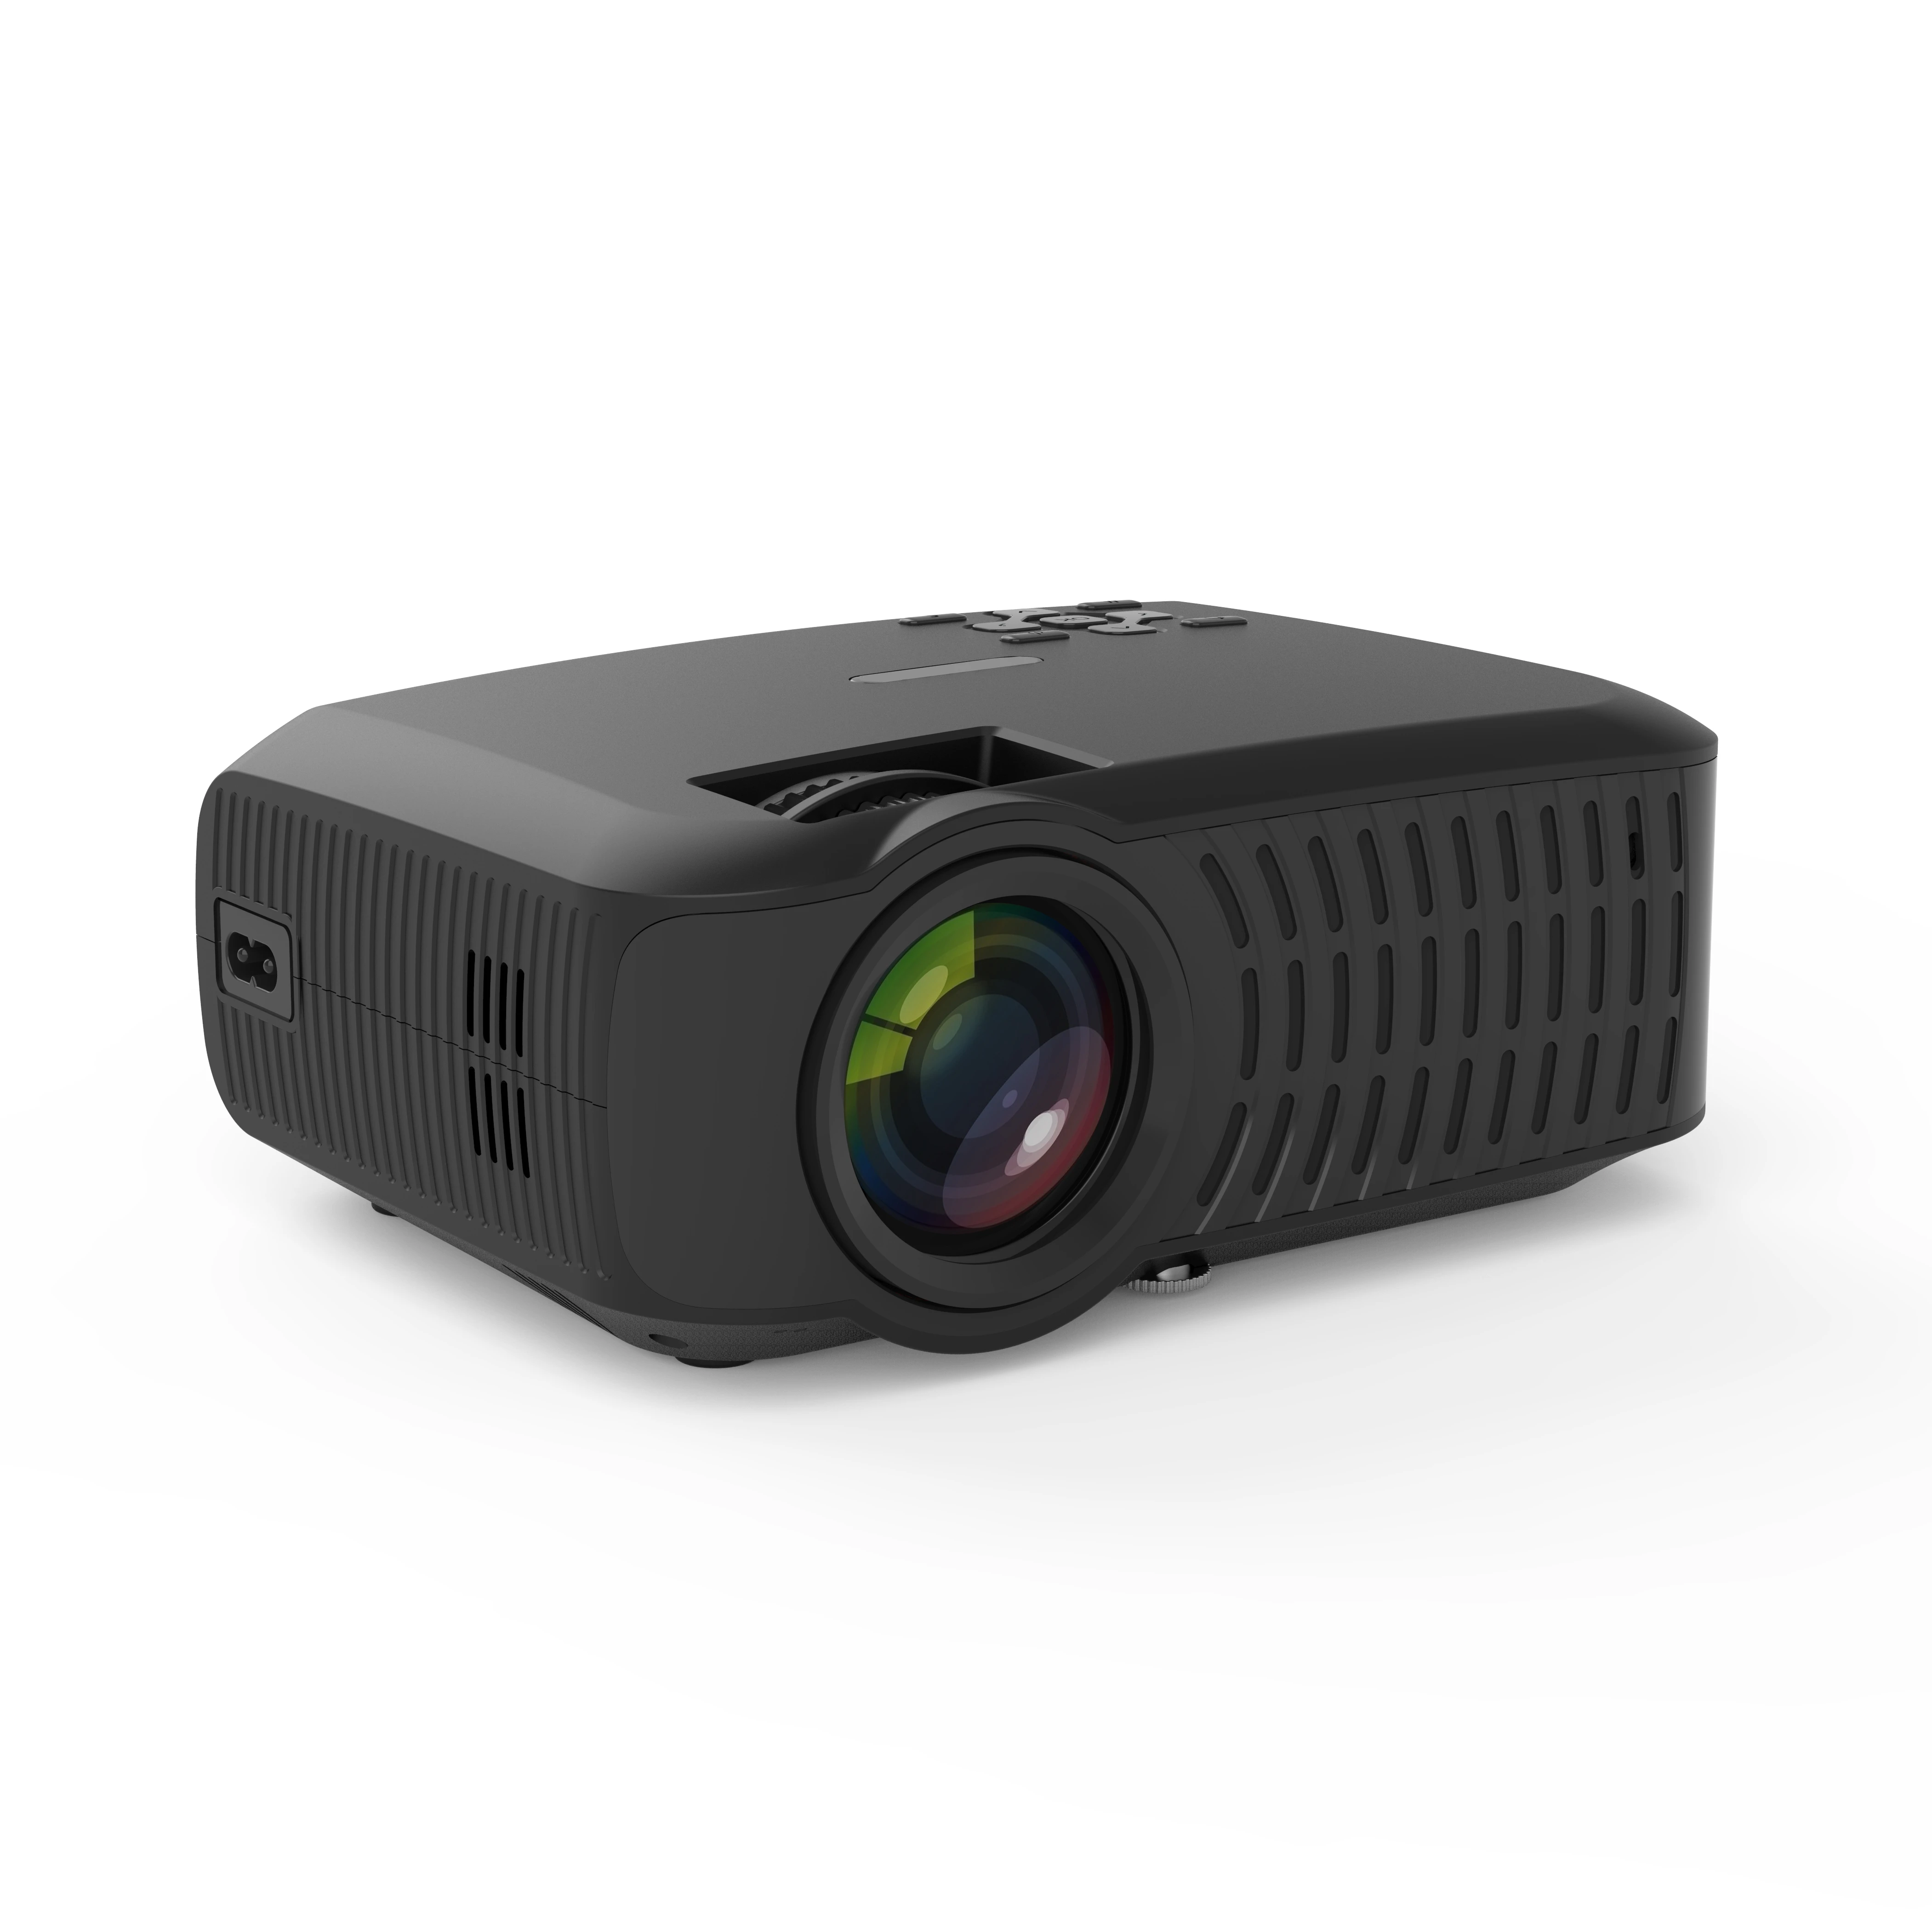 

2019 Anxin projector hd AN06 2200 lumens 4.3inch Lcd 720p mini projector 1280*768p native resolution mini wifi projector, Black/white/mix